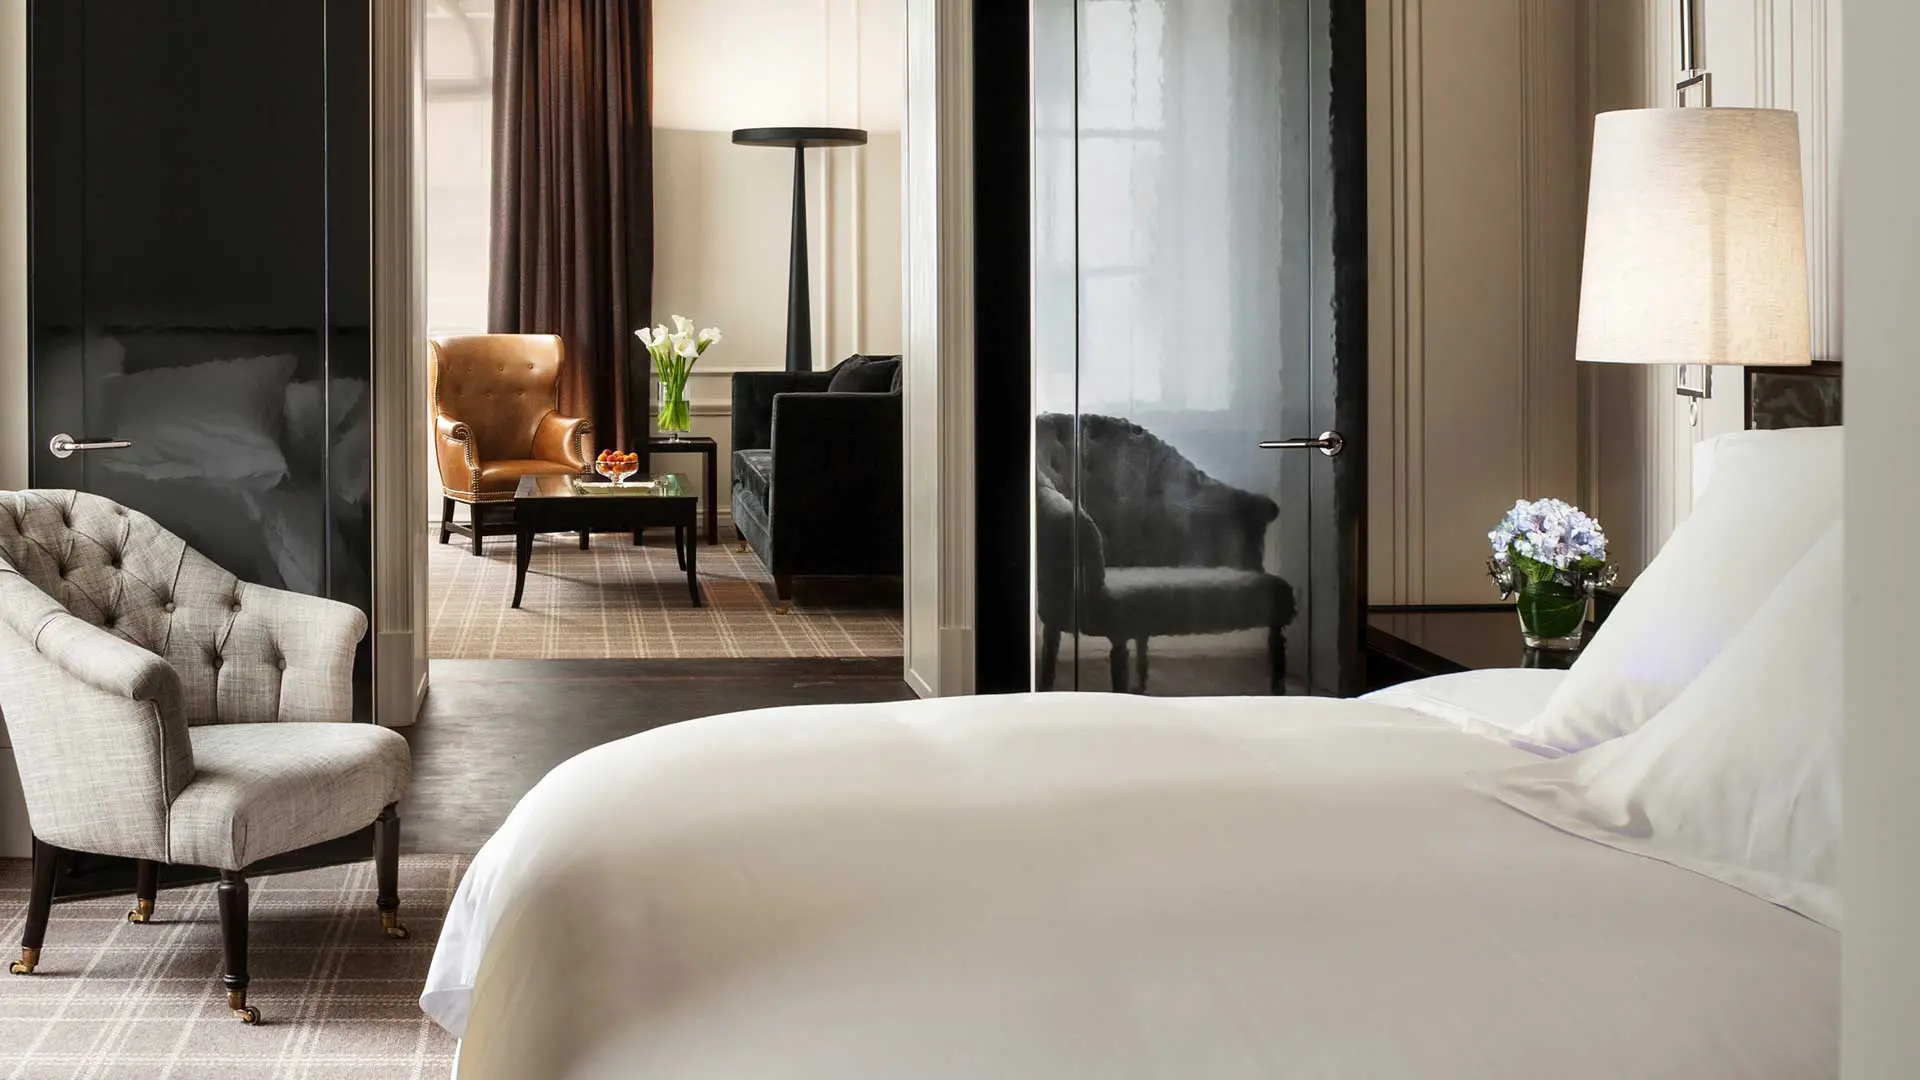 Hotel review Accommodation' - Rosewood London - 4